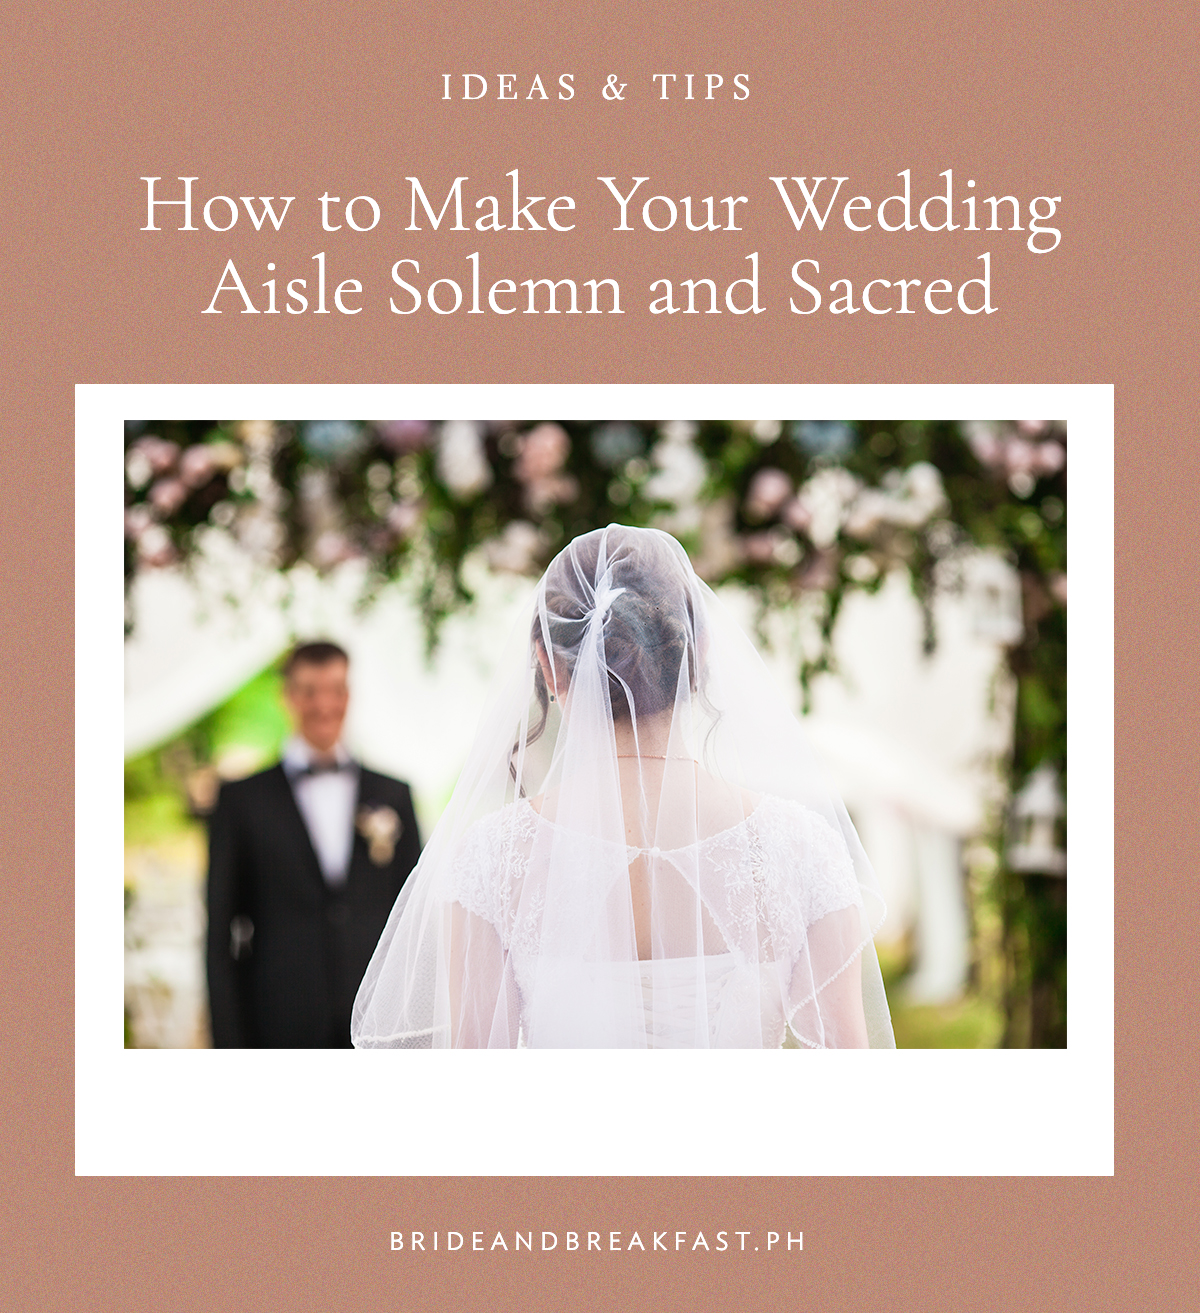 How to make your wedding aisle solemn and sacred